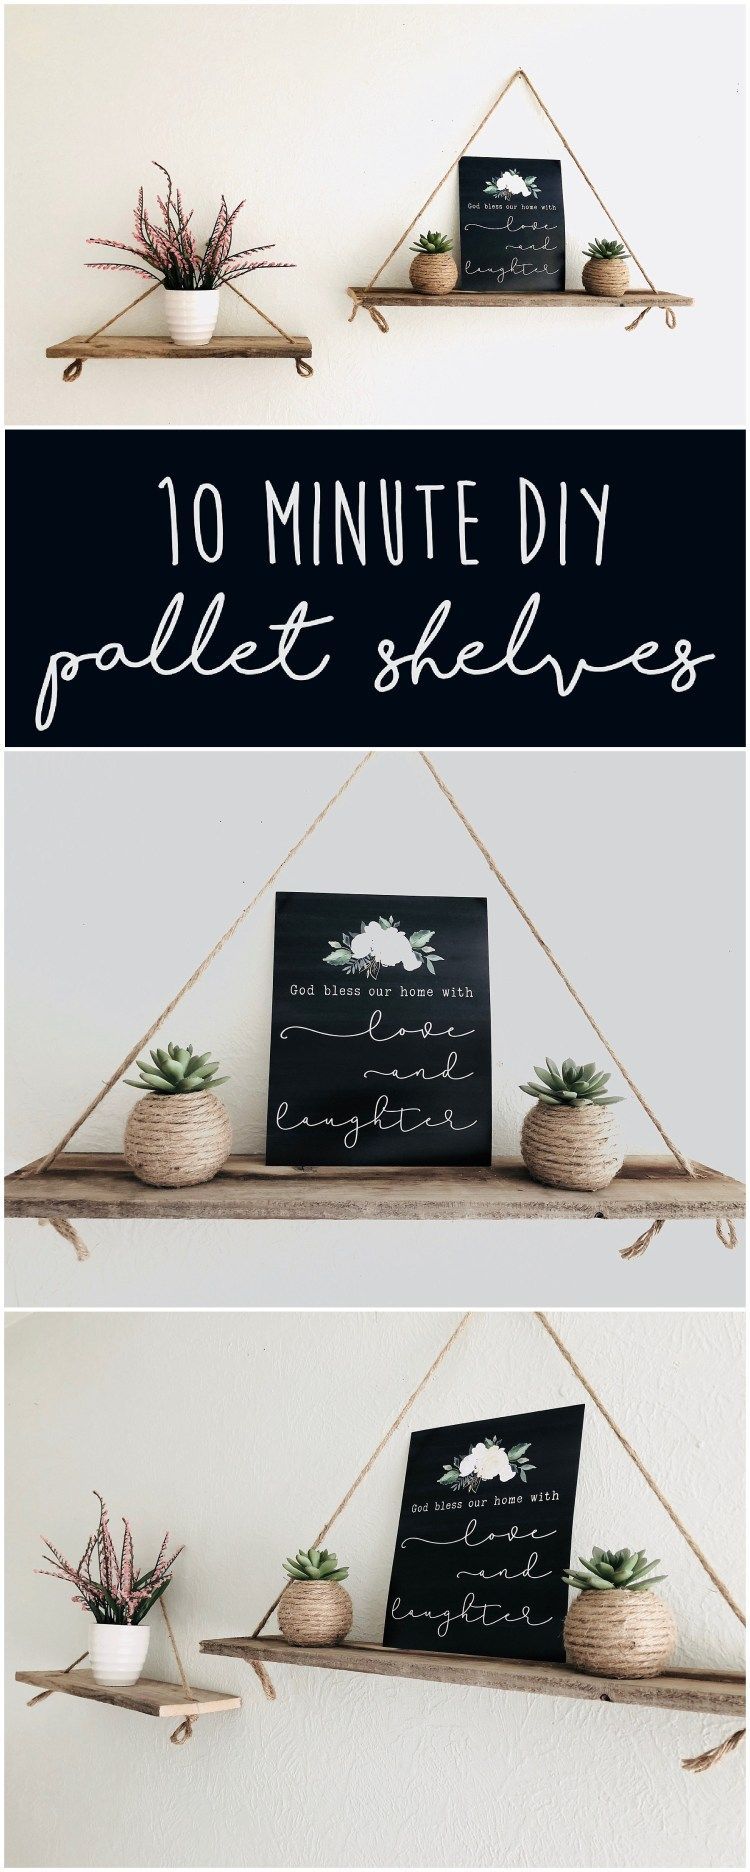 Easy DIY Pallet Shelves - Six Clever Sisters - Easy DIY Pallet Shelves - Six Clever Sisters -   19 diy Shelves floating ideas